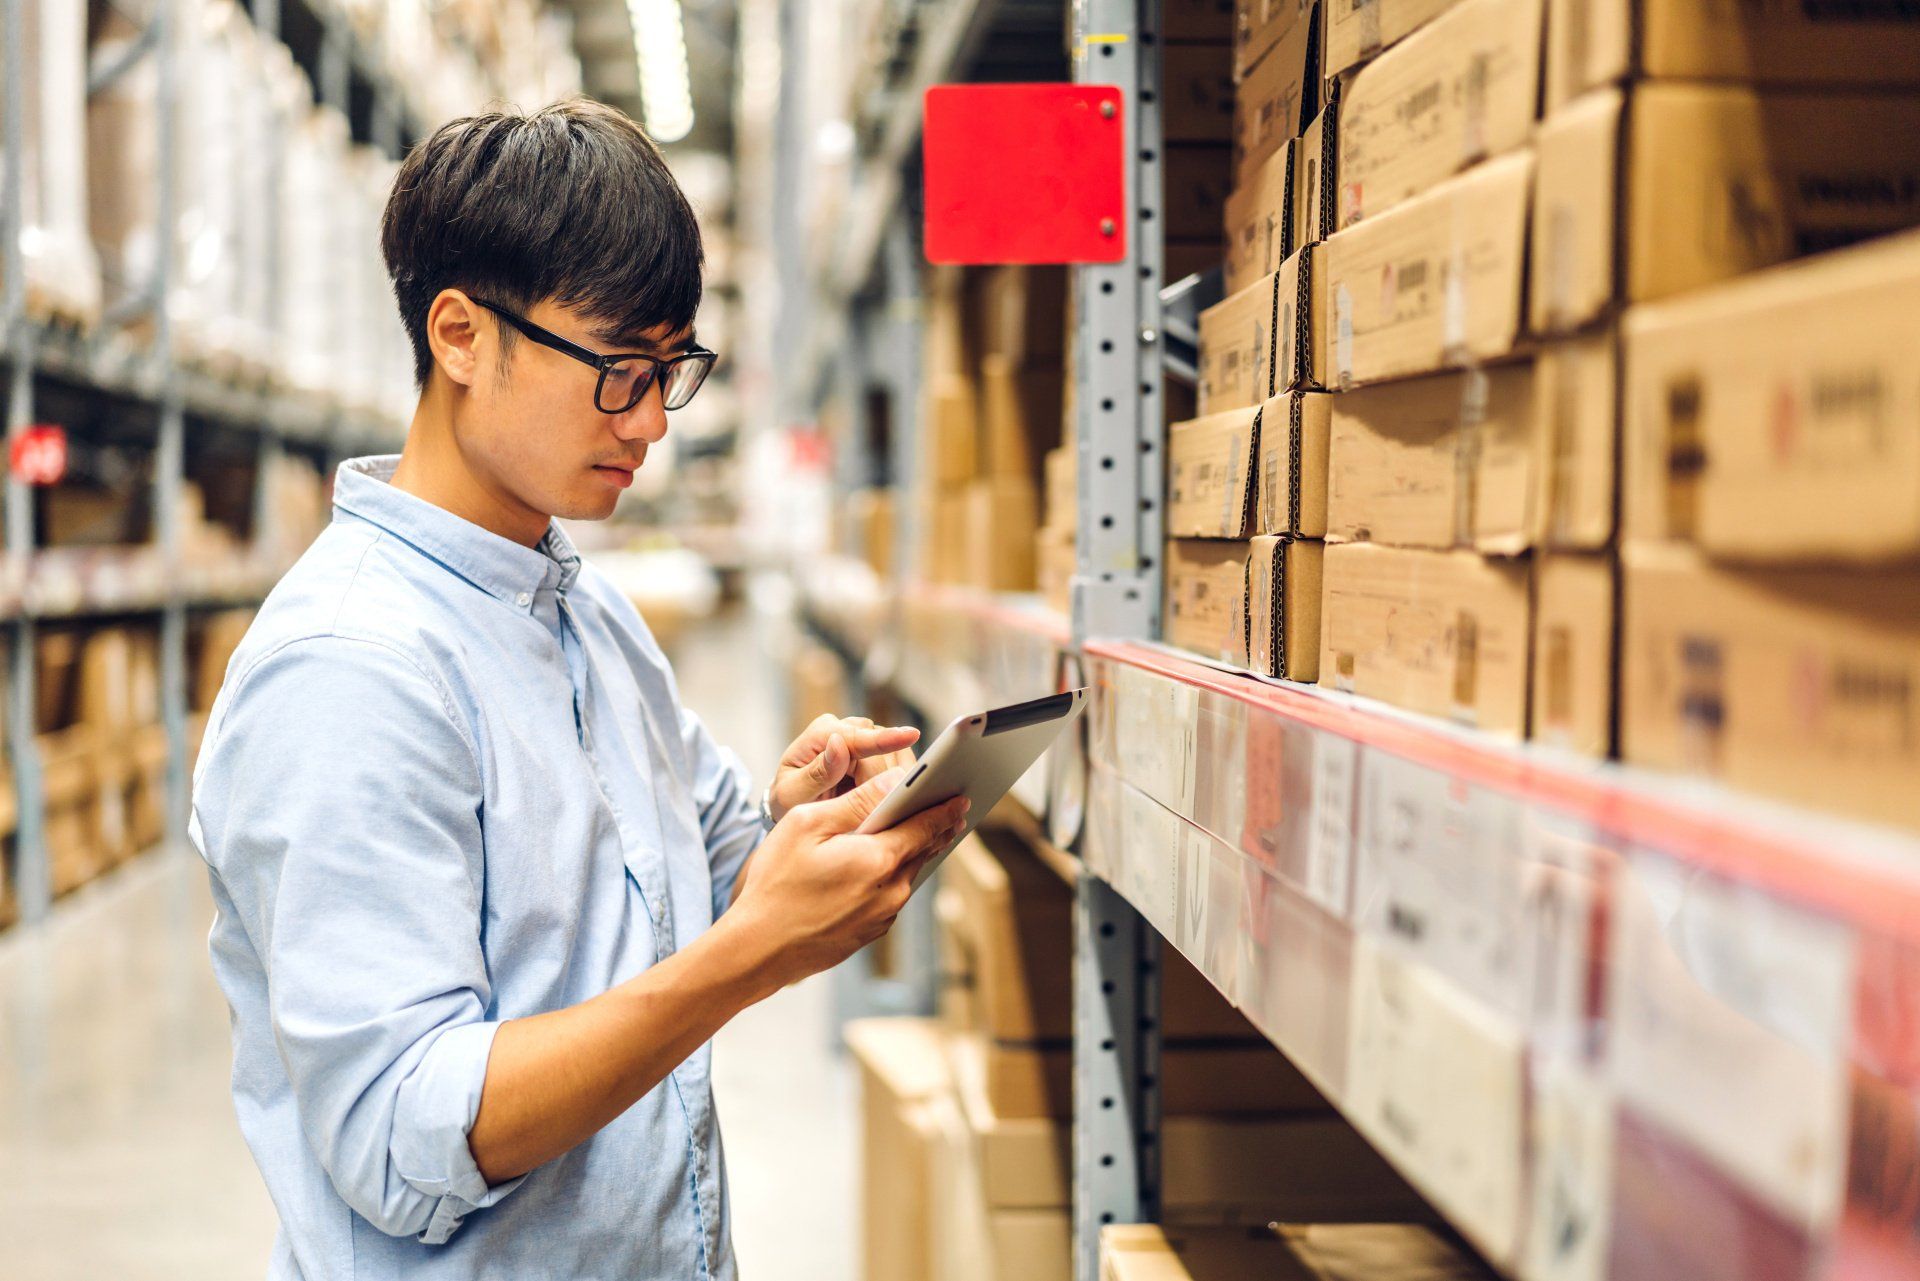 What do customers appreciate about PackageIt’s vendor-managed inventory program?